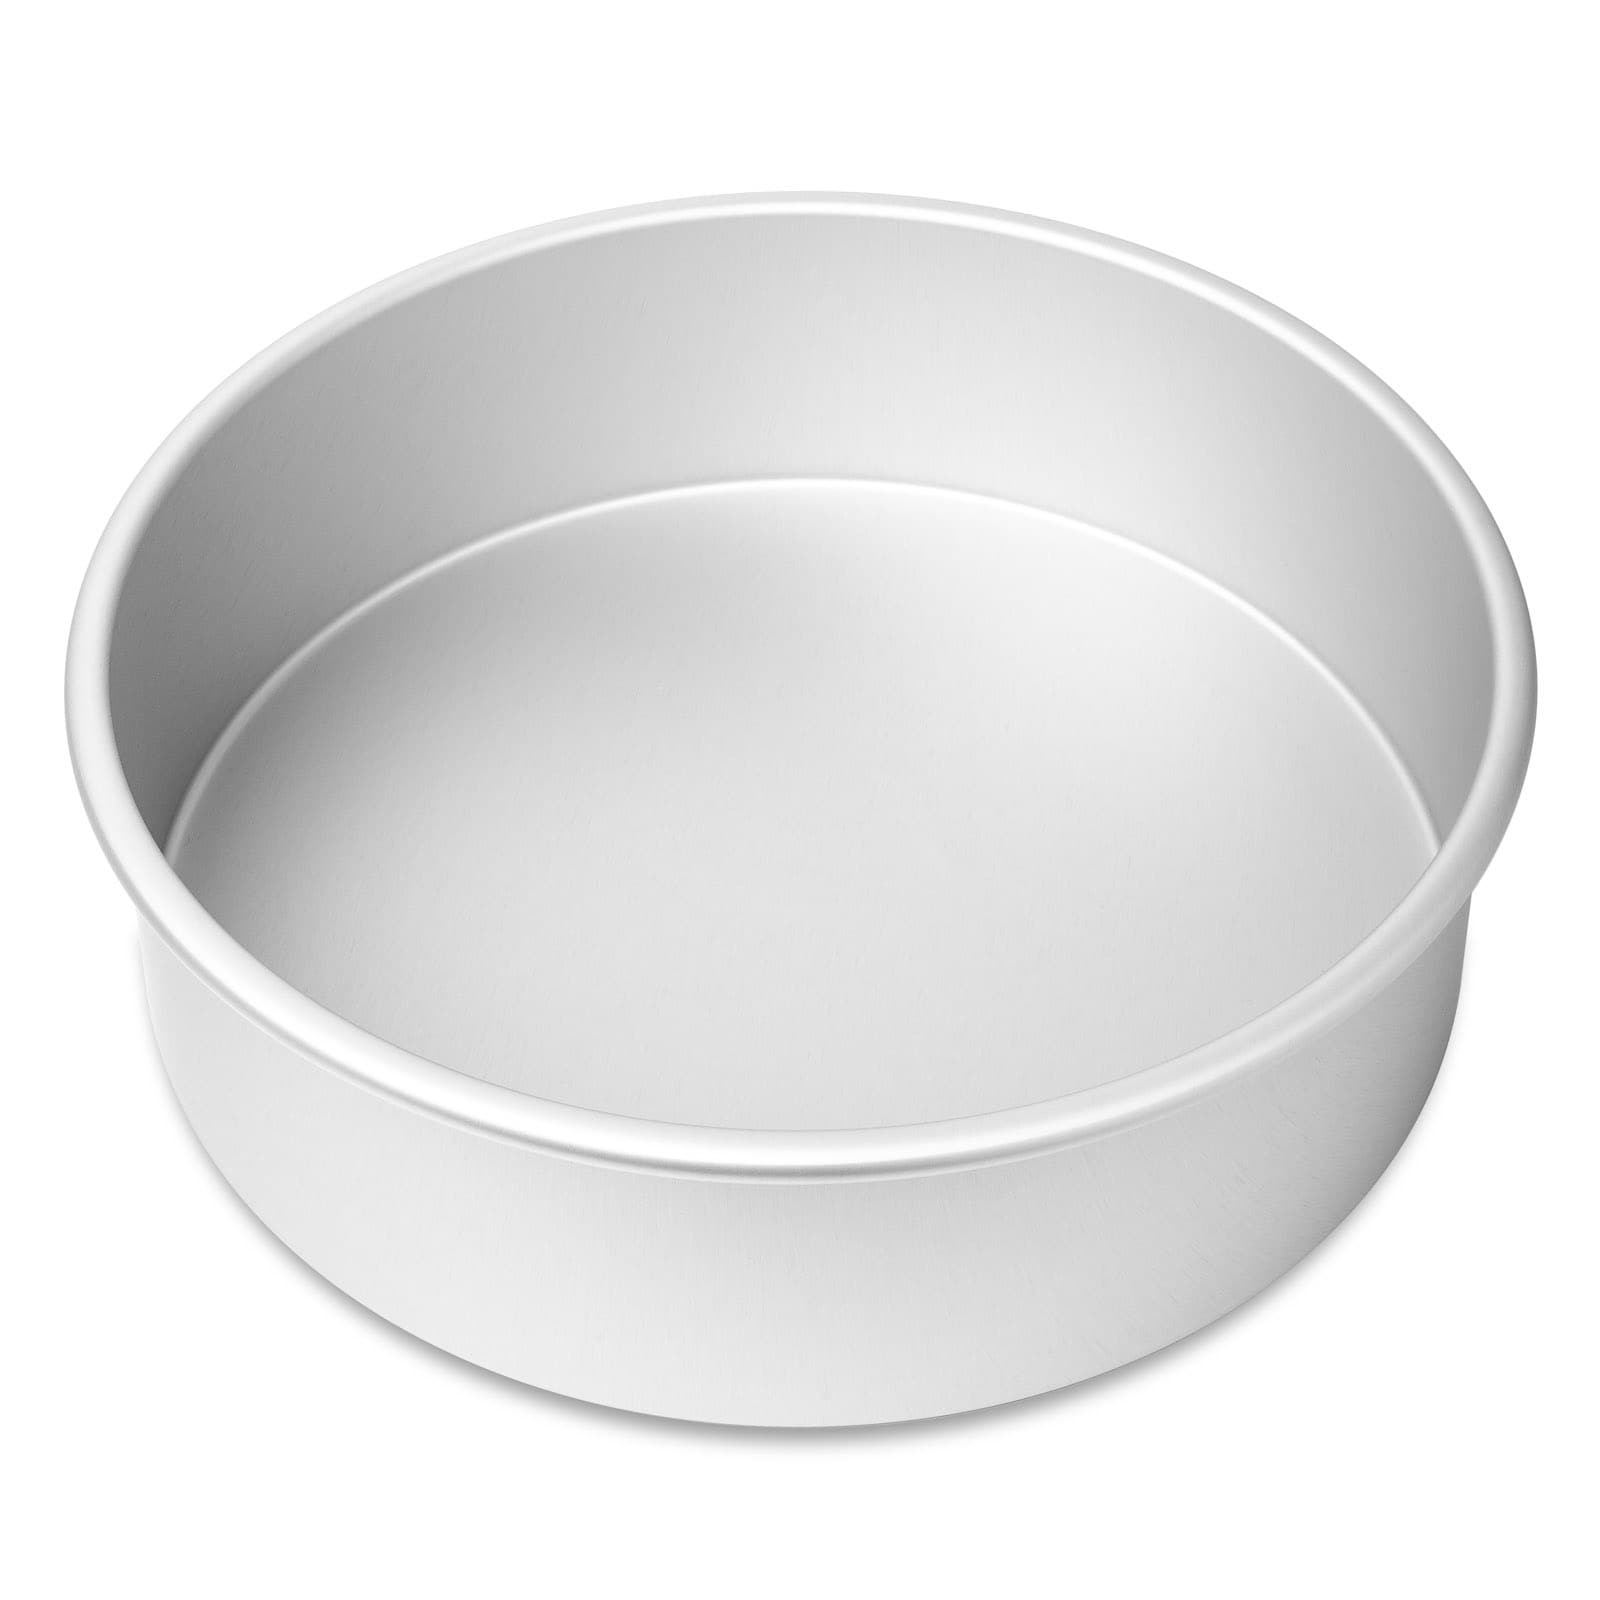 https://ak1.ostkcdn.com/images/products/is/images/direct/27b02feae7f89c53fa92796122c237398a16eff0/Round-Aluminum-Cake-Pans---Last-Confection.jpg